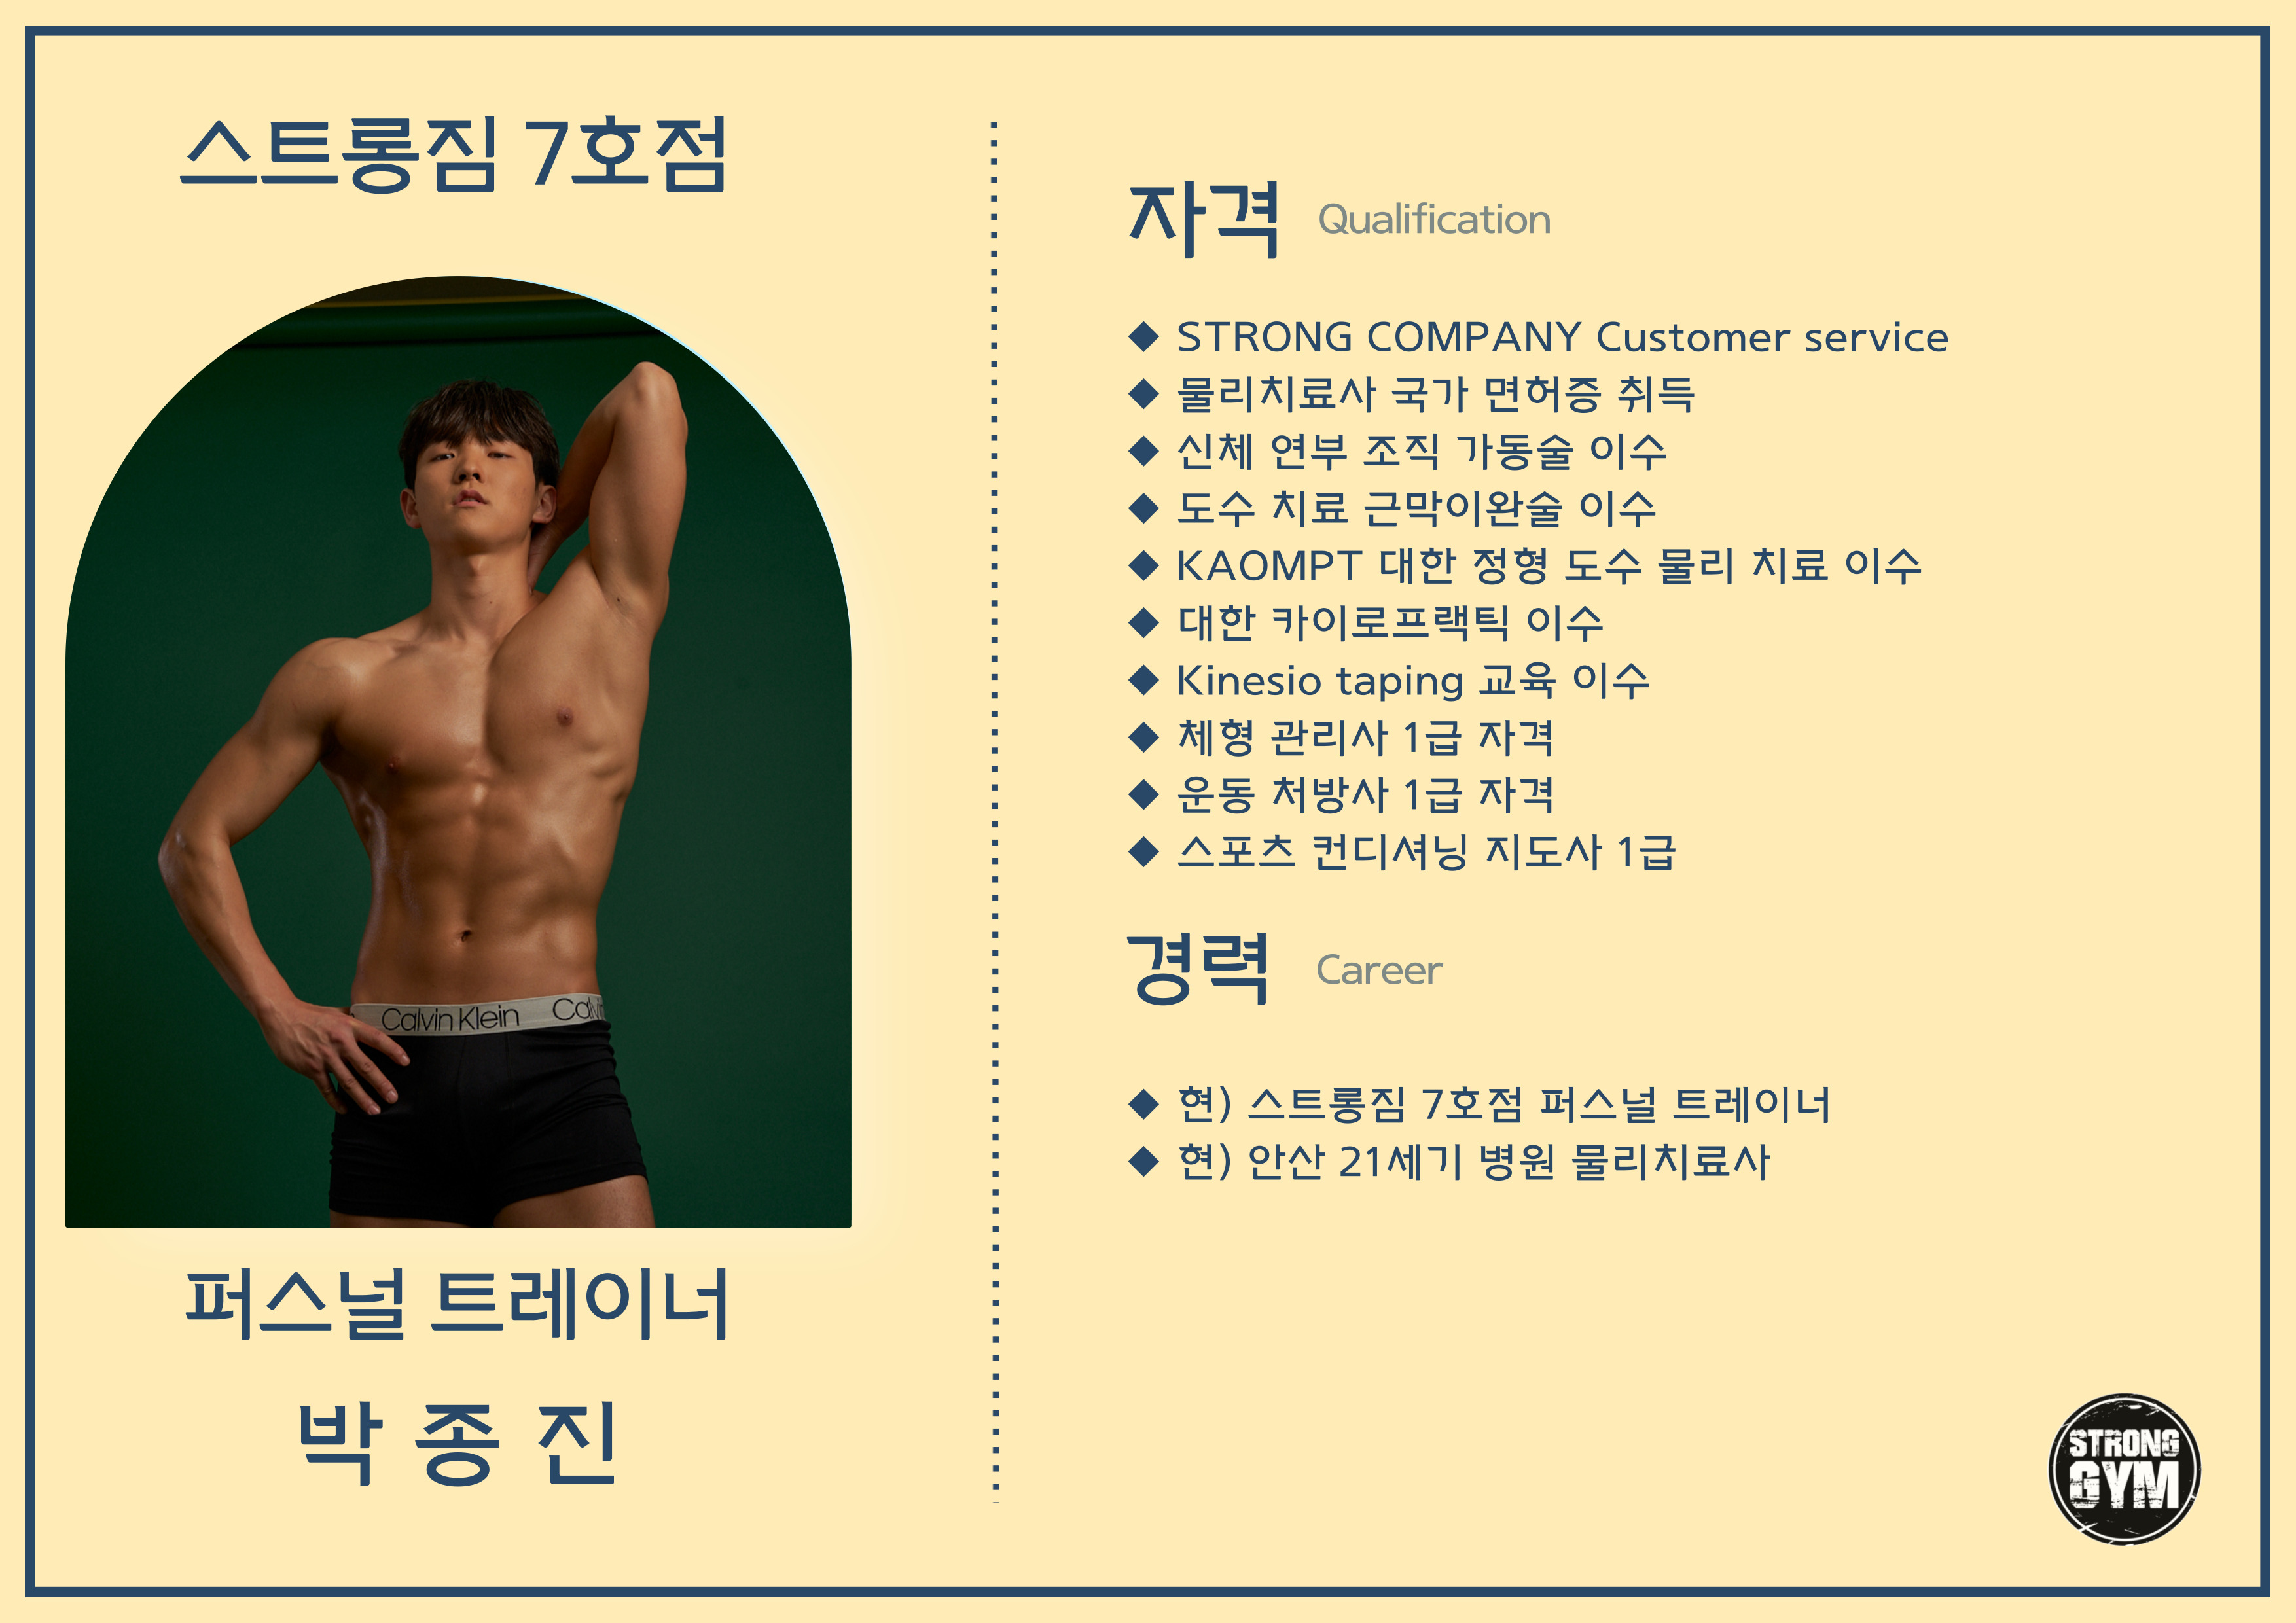 http://www.stronggym.co.kr/user/s/stronggym/editor/2308/9ad06aedff48db557a2211da339d9a05_1693139718_0431.jpg 이미지크게보기